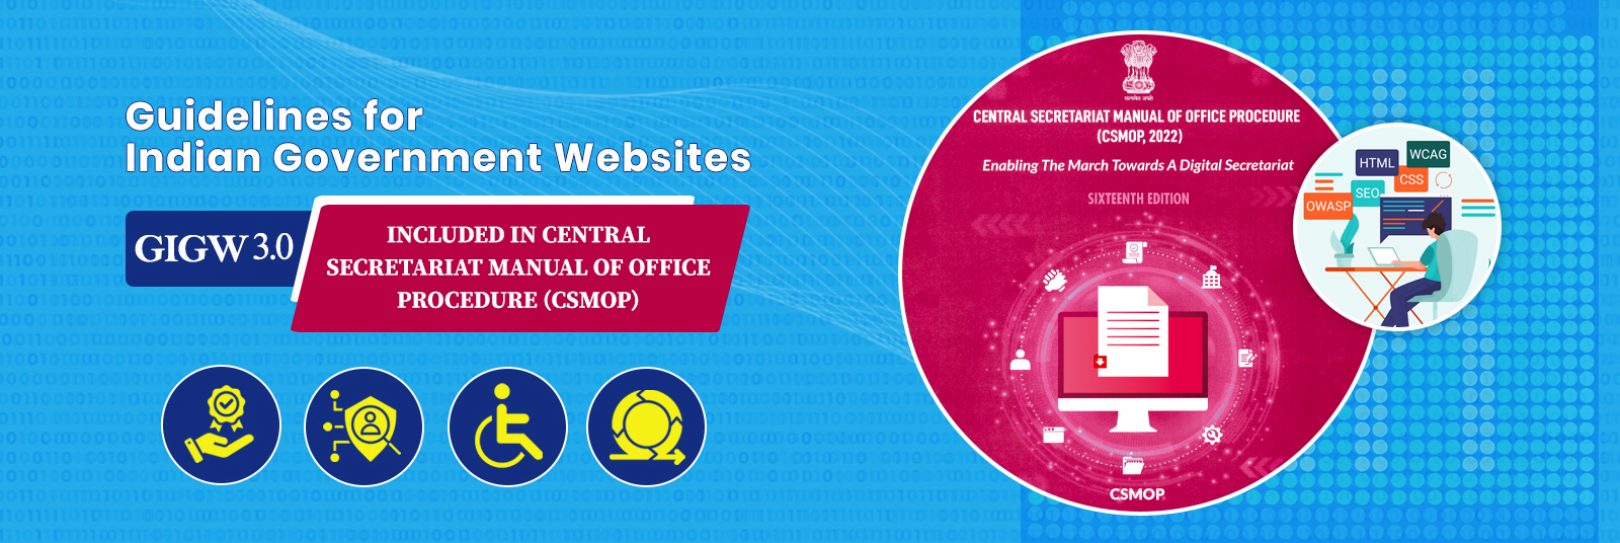 Guidelines for Indian Government Websites